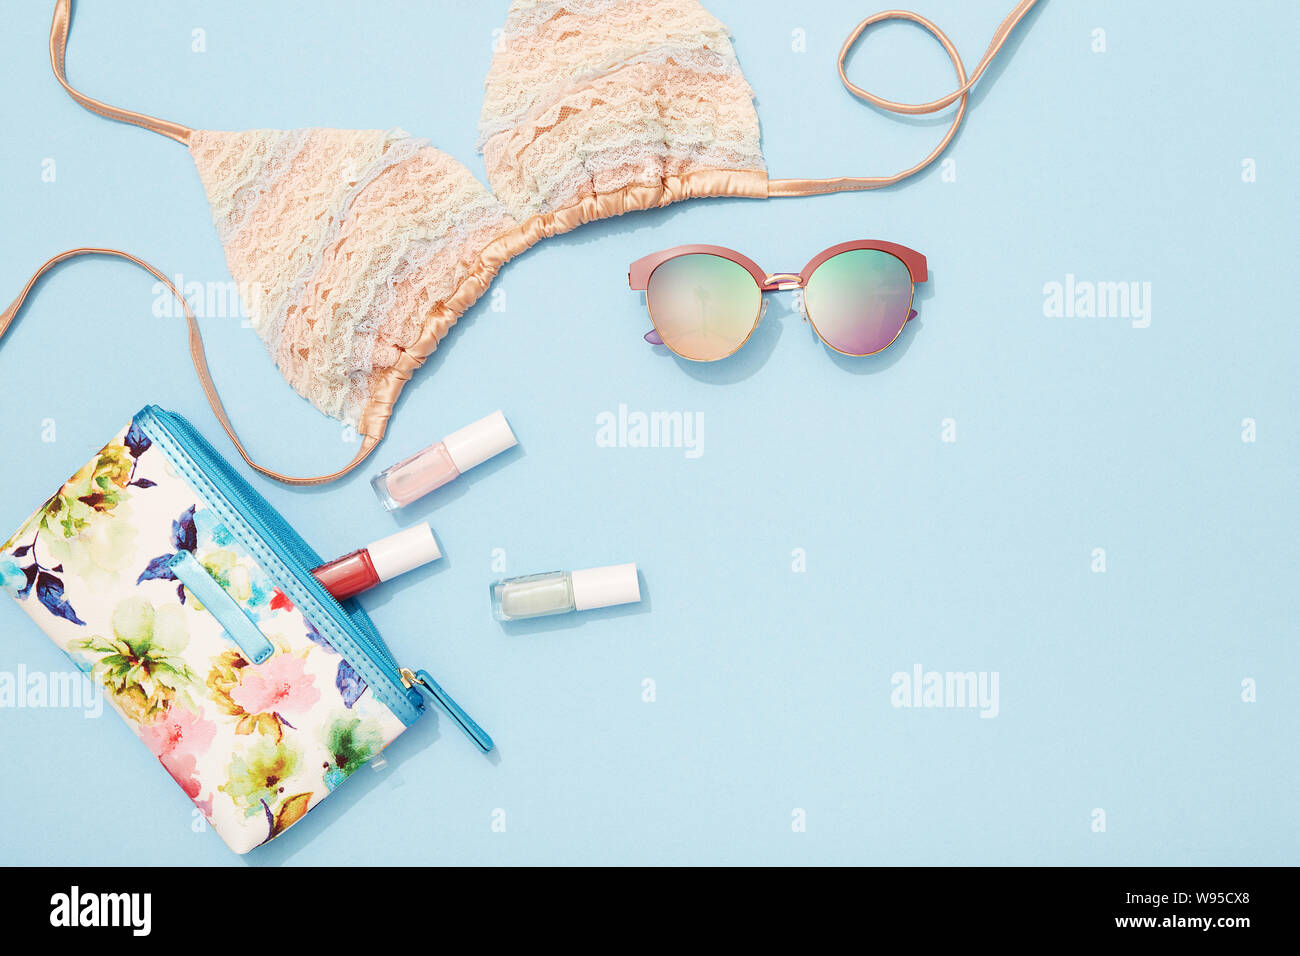 Young woman beach holiday fashion and beauty products and accessories flat lay on blue background Stock Photo